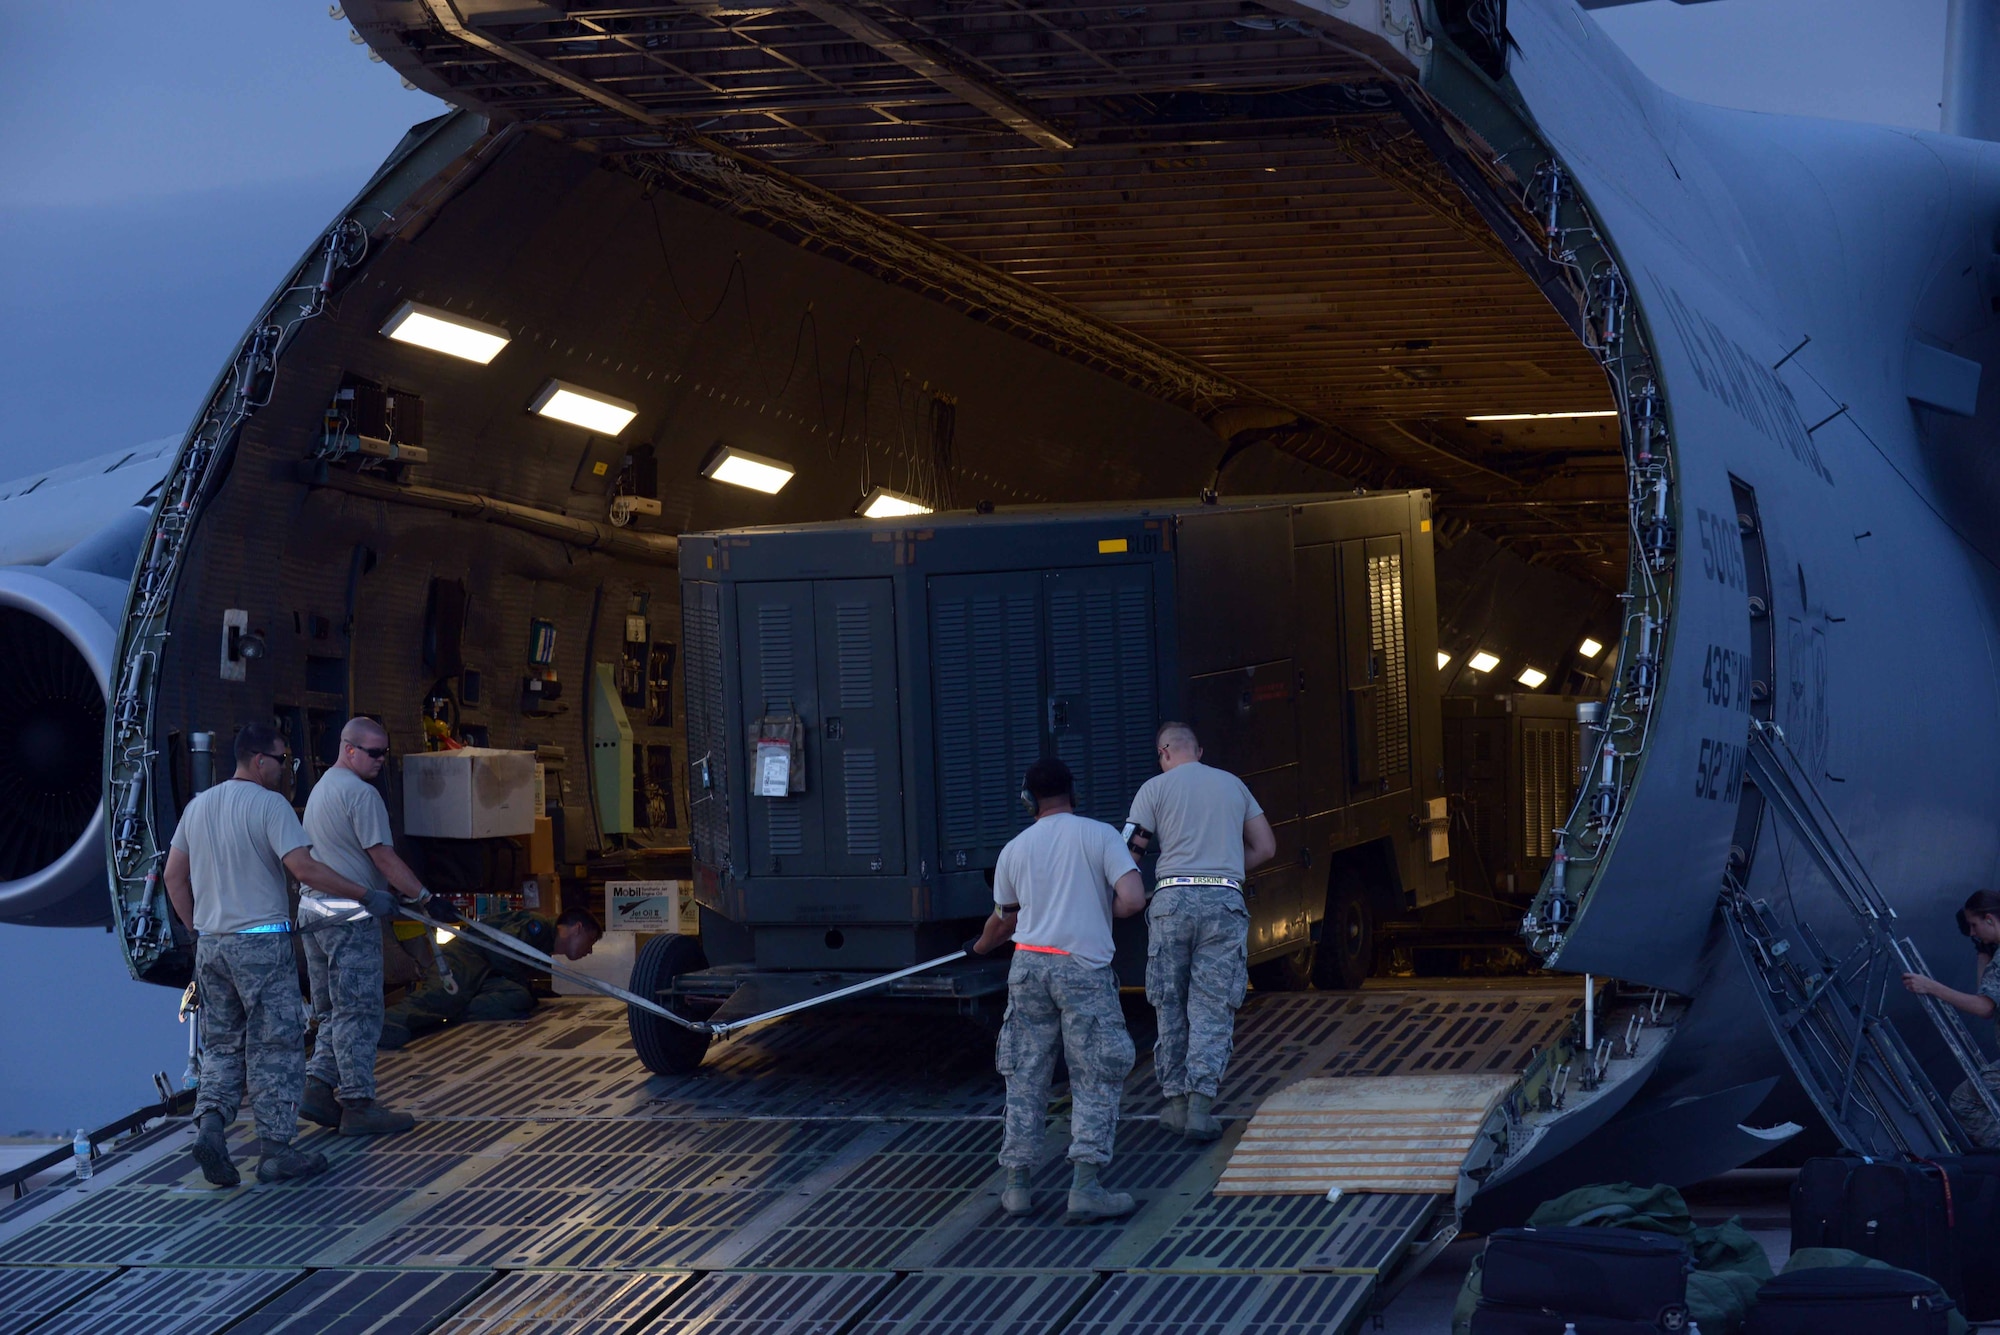 Airmen with the 28th Aircraft Maintenance Squadron guide equipment onto a Dover Air Force Base (AFB), Del., C-5 Galaxy at Ellsworth AFB, S.D., Aug. 2, 2016. The C-5 Galaxy is one of the largest aircraft in the world and has a greater capacity than any other airlifter, with the ability to carry 36 standard pallets and 81 troops simultaneously. (U.S. Air Force photo by Airman Donald Knechtel) 